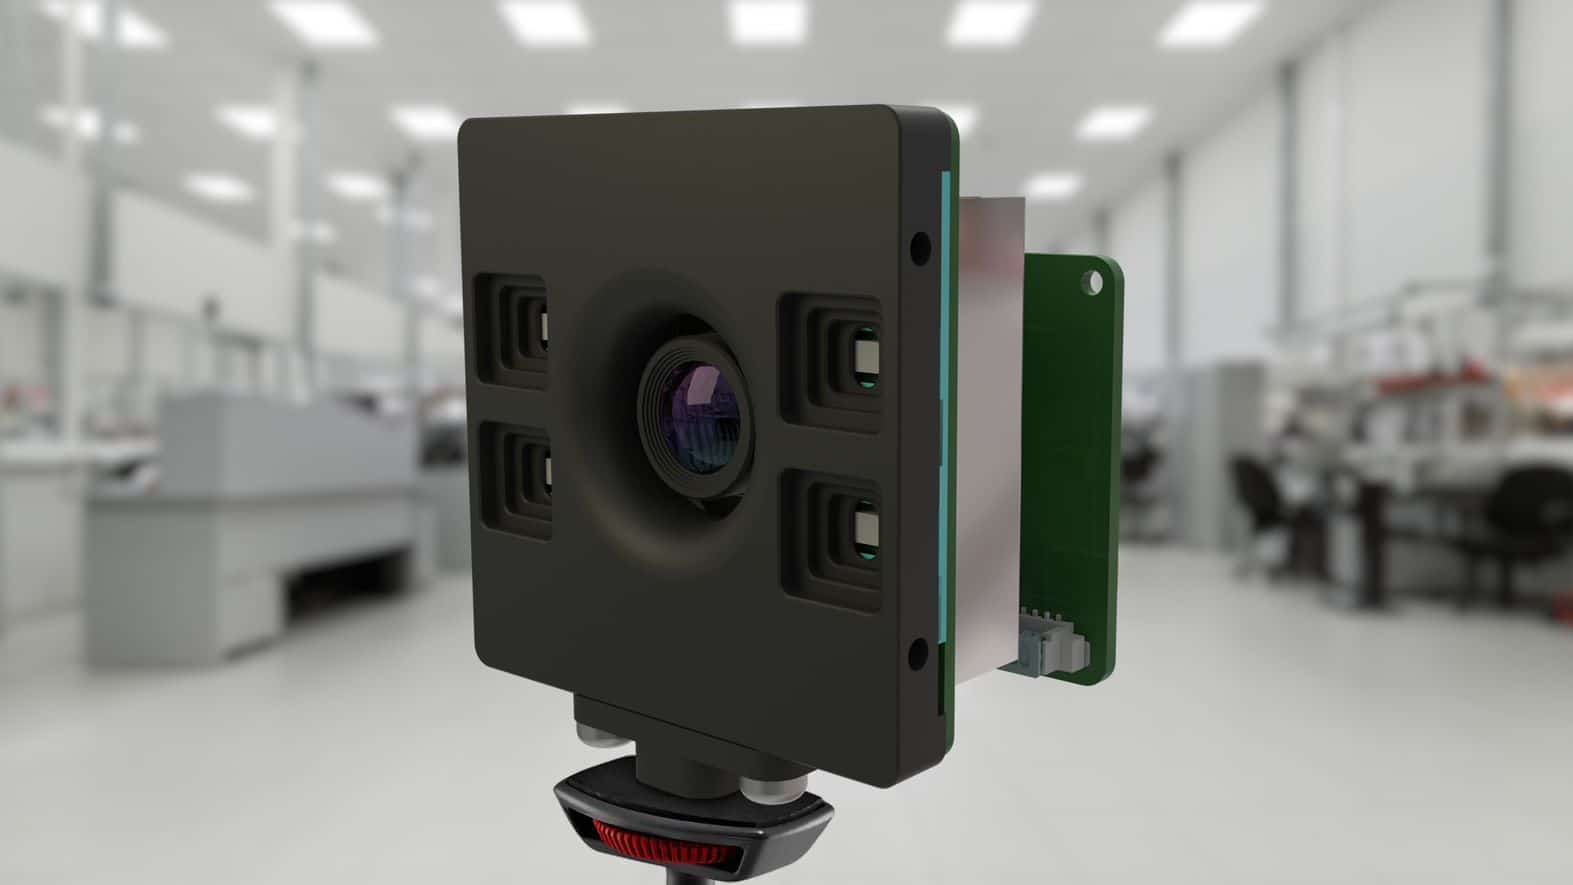 FRAMOS Announces Release of FSM-IMX570 Devkit for the Development of Time-of-Flight (ToF) Cameras with Sony’s IMX570 iToF Image Sensor